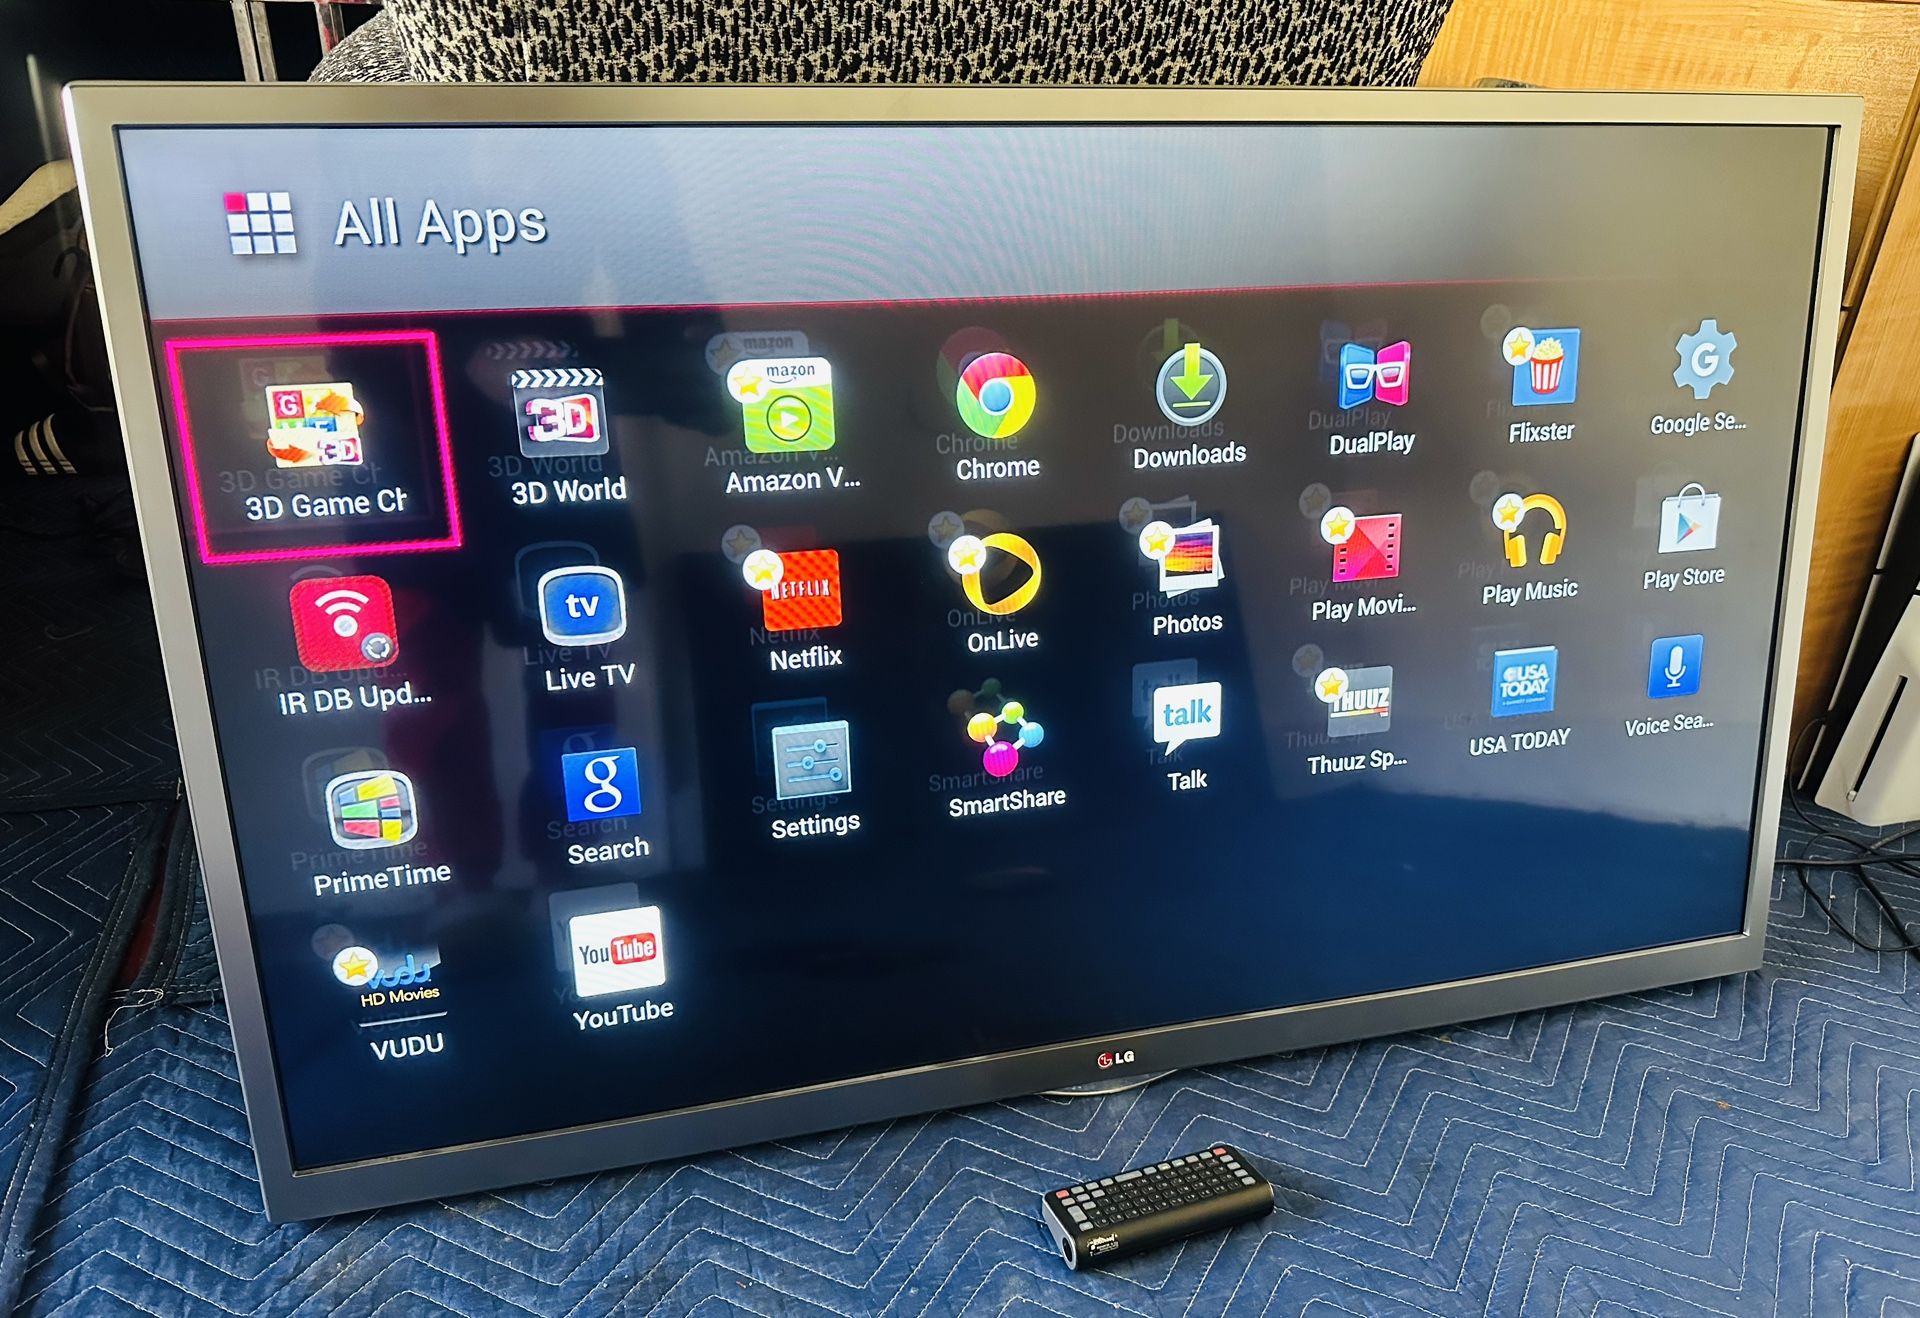 50 Inch LG 3D Smart TV with the Original Keyboard Remote & Wall Mount (Also have More TVs Available)